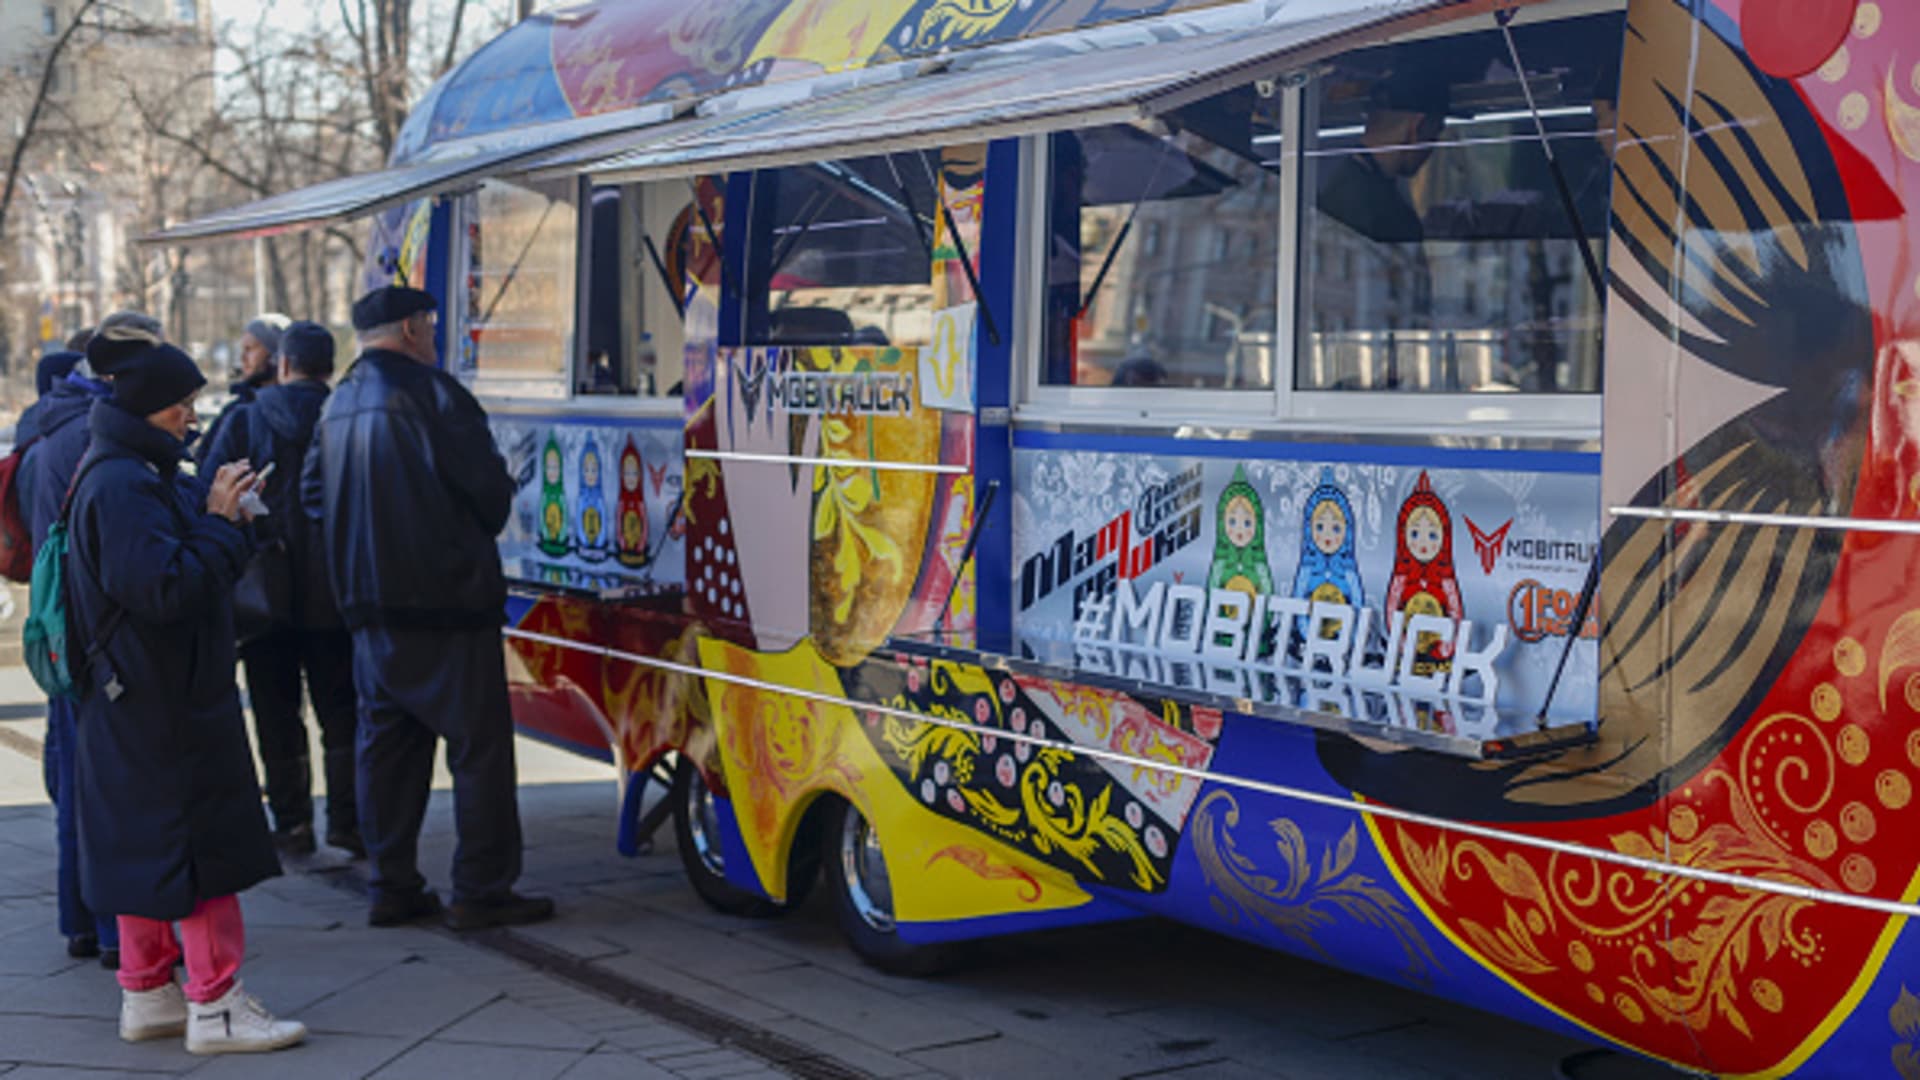 A mobile fast food van is seen in Moscow, Russia, as people buy alternative fast food after McDonald's closed its roughly 850 restaurants across the country. March 21, 2022.